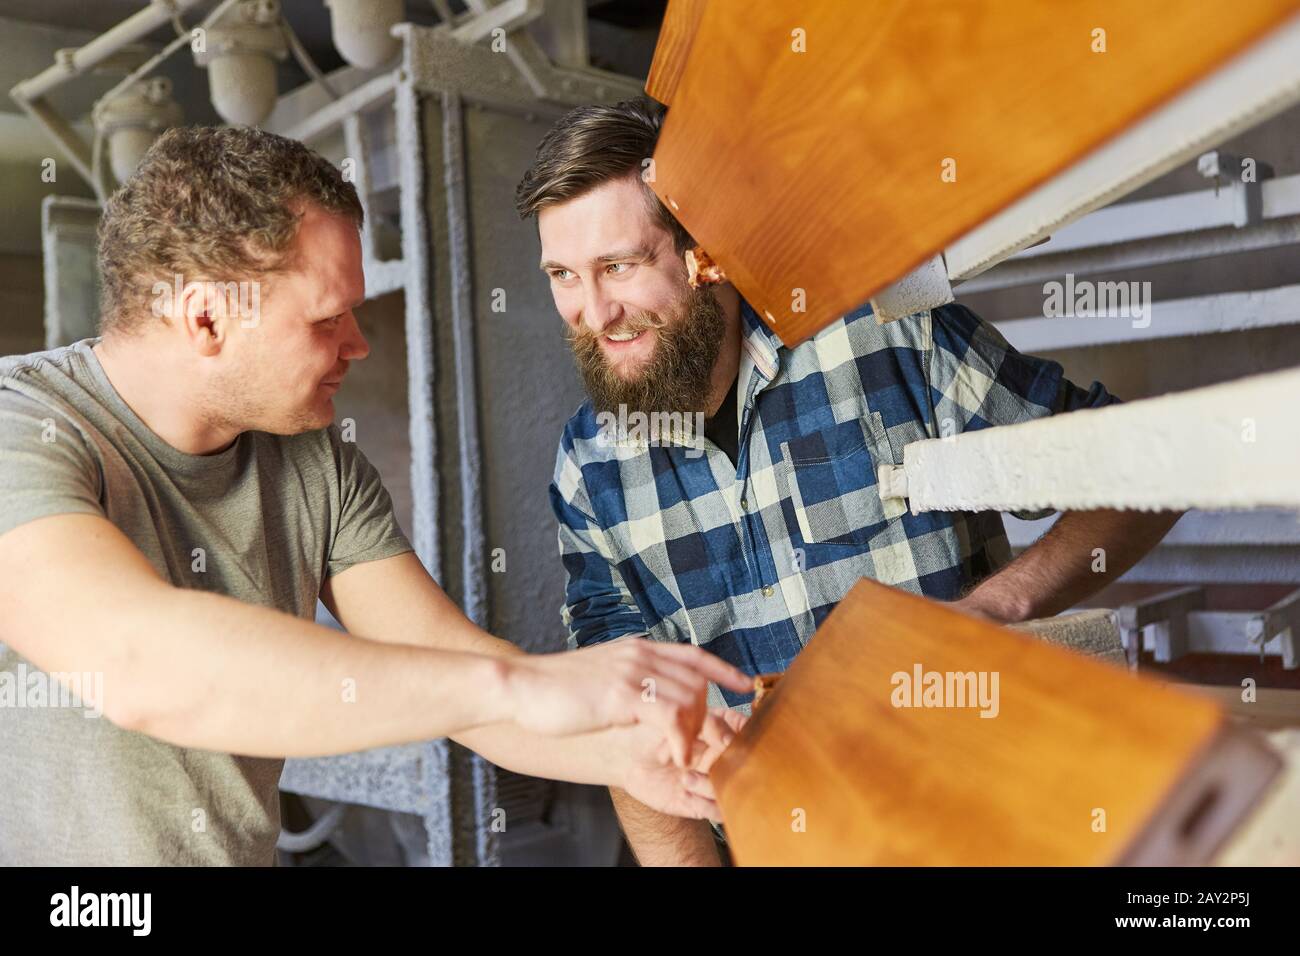 Two carpenters as furniture makers discuss a wooden workpiece in the joinery Stock Photo